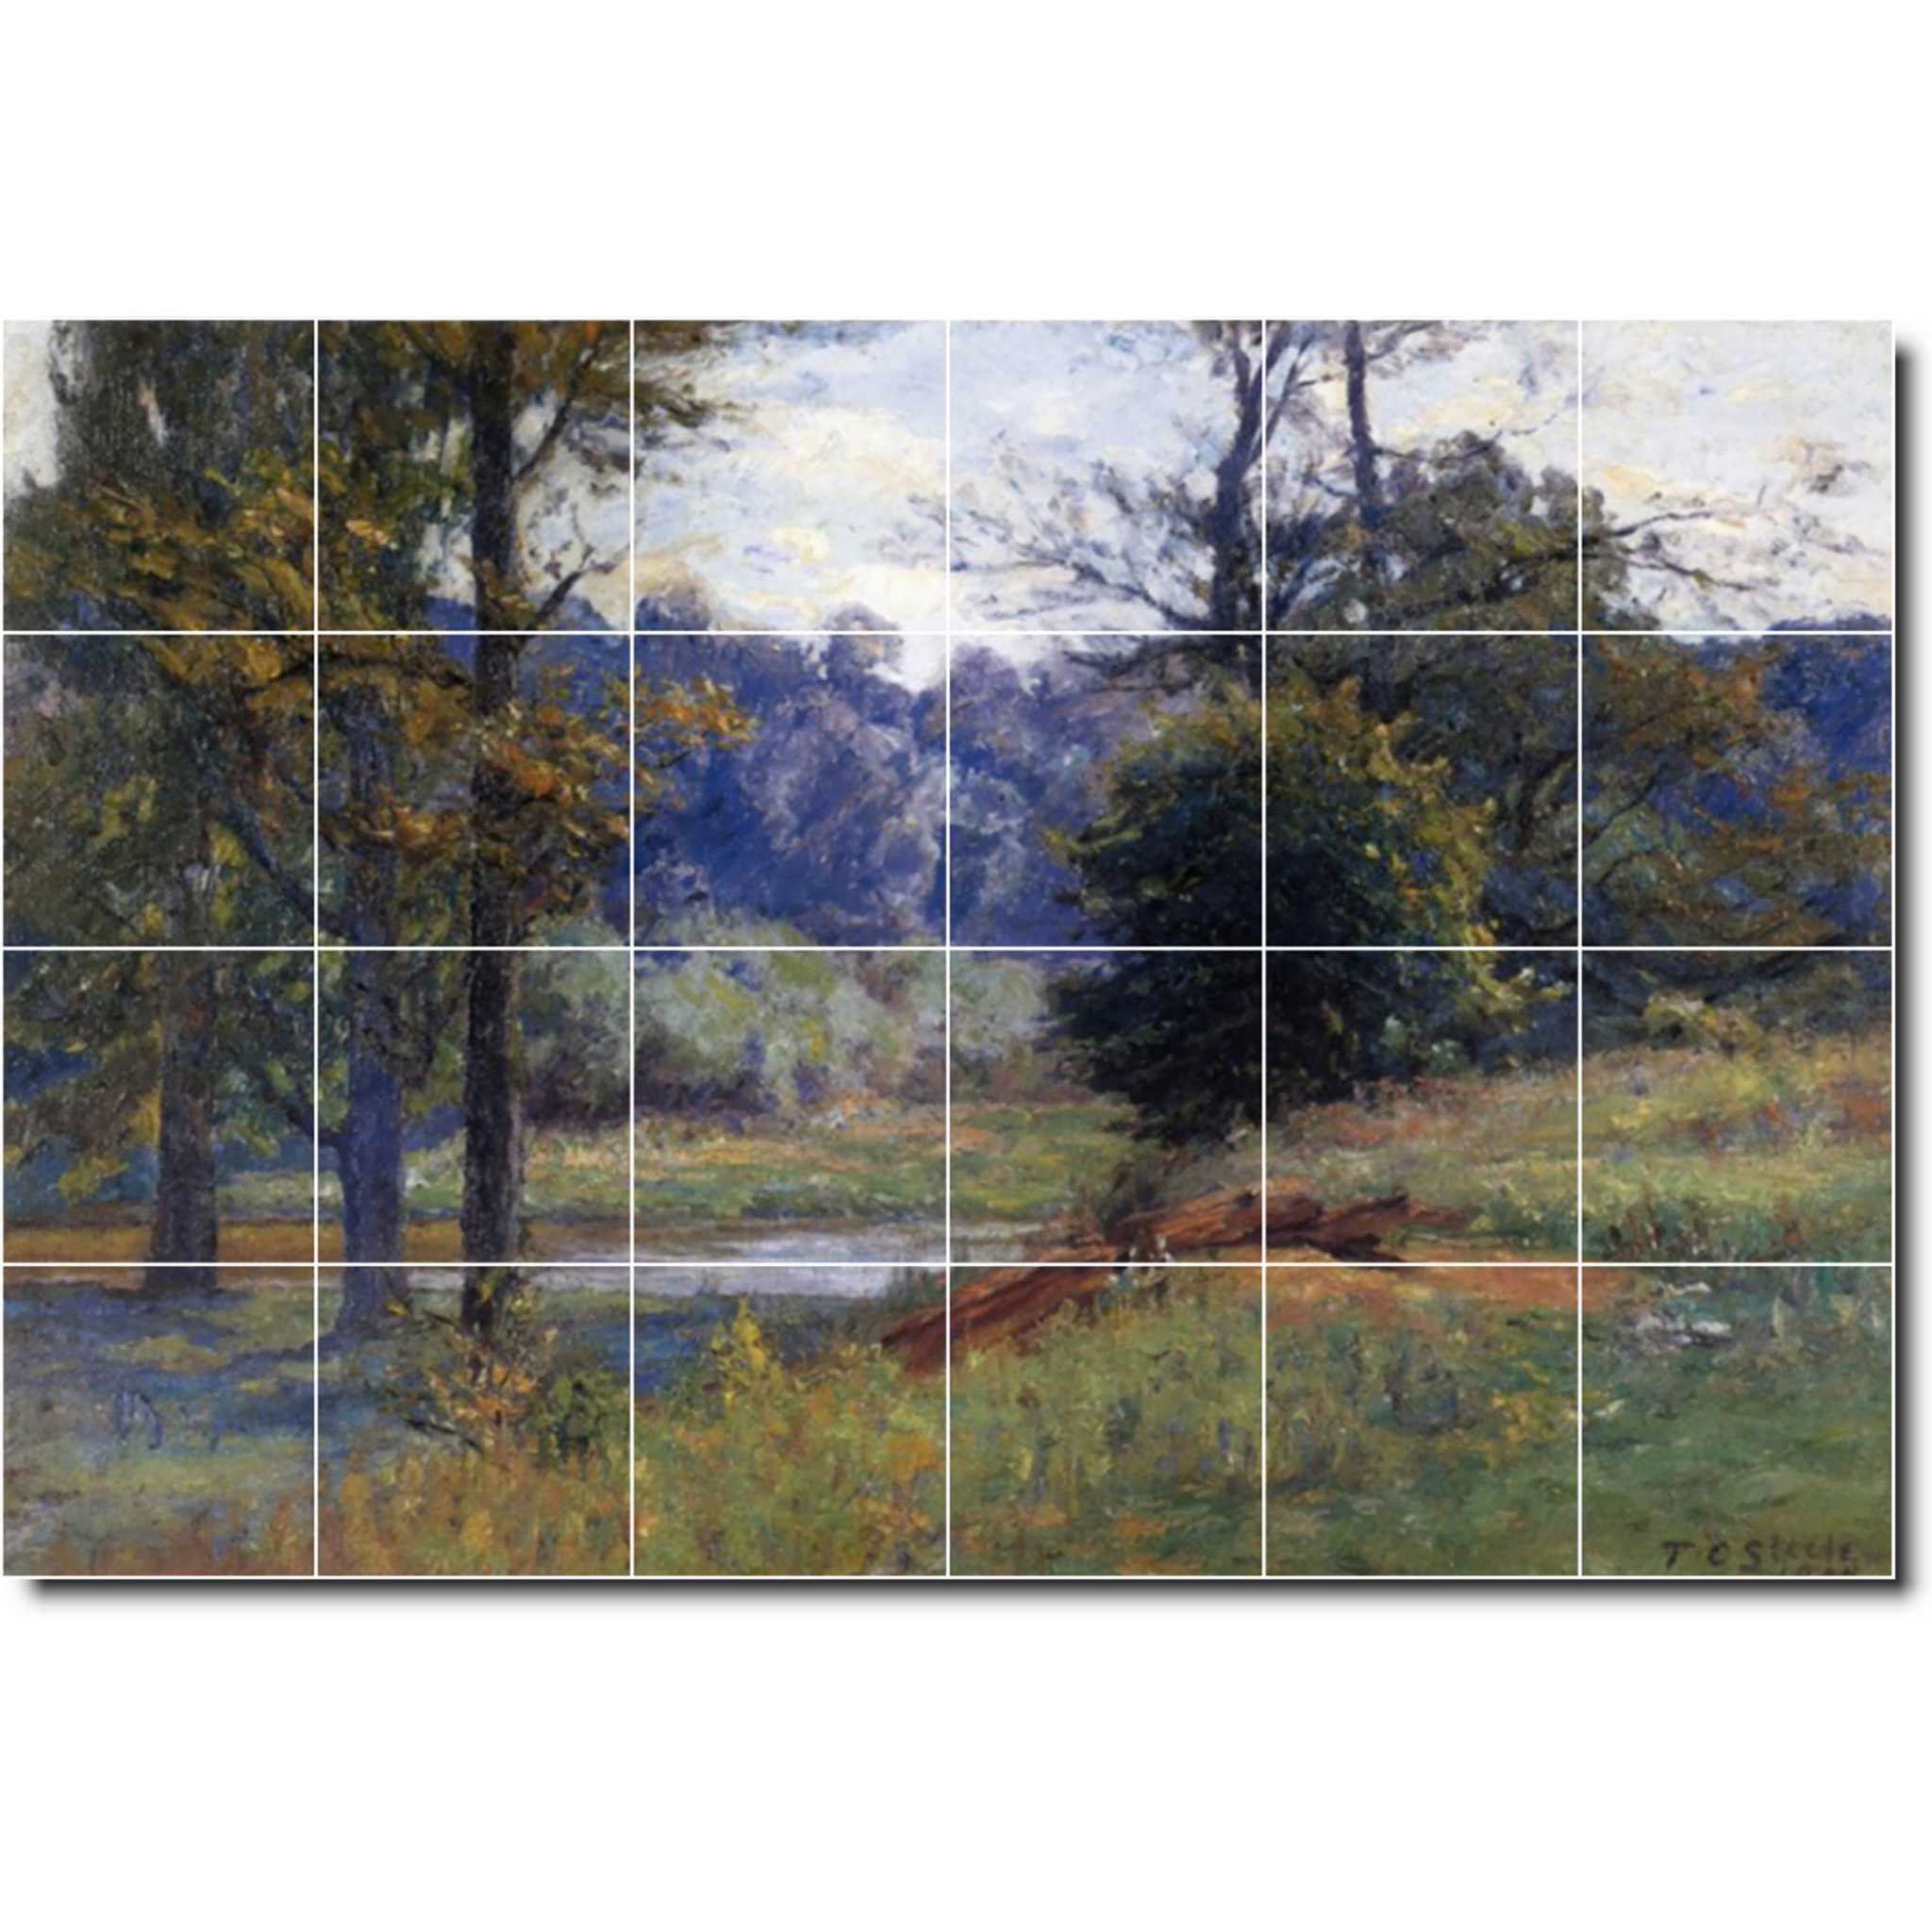 theodore steele country painting ceramic tile mural p08359